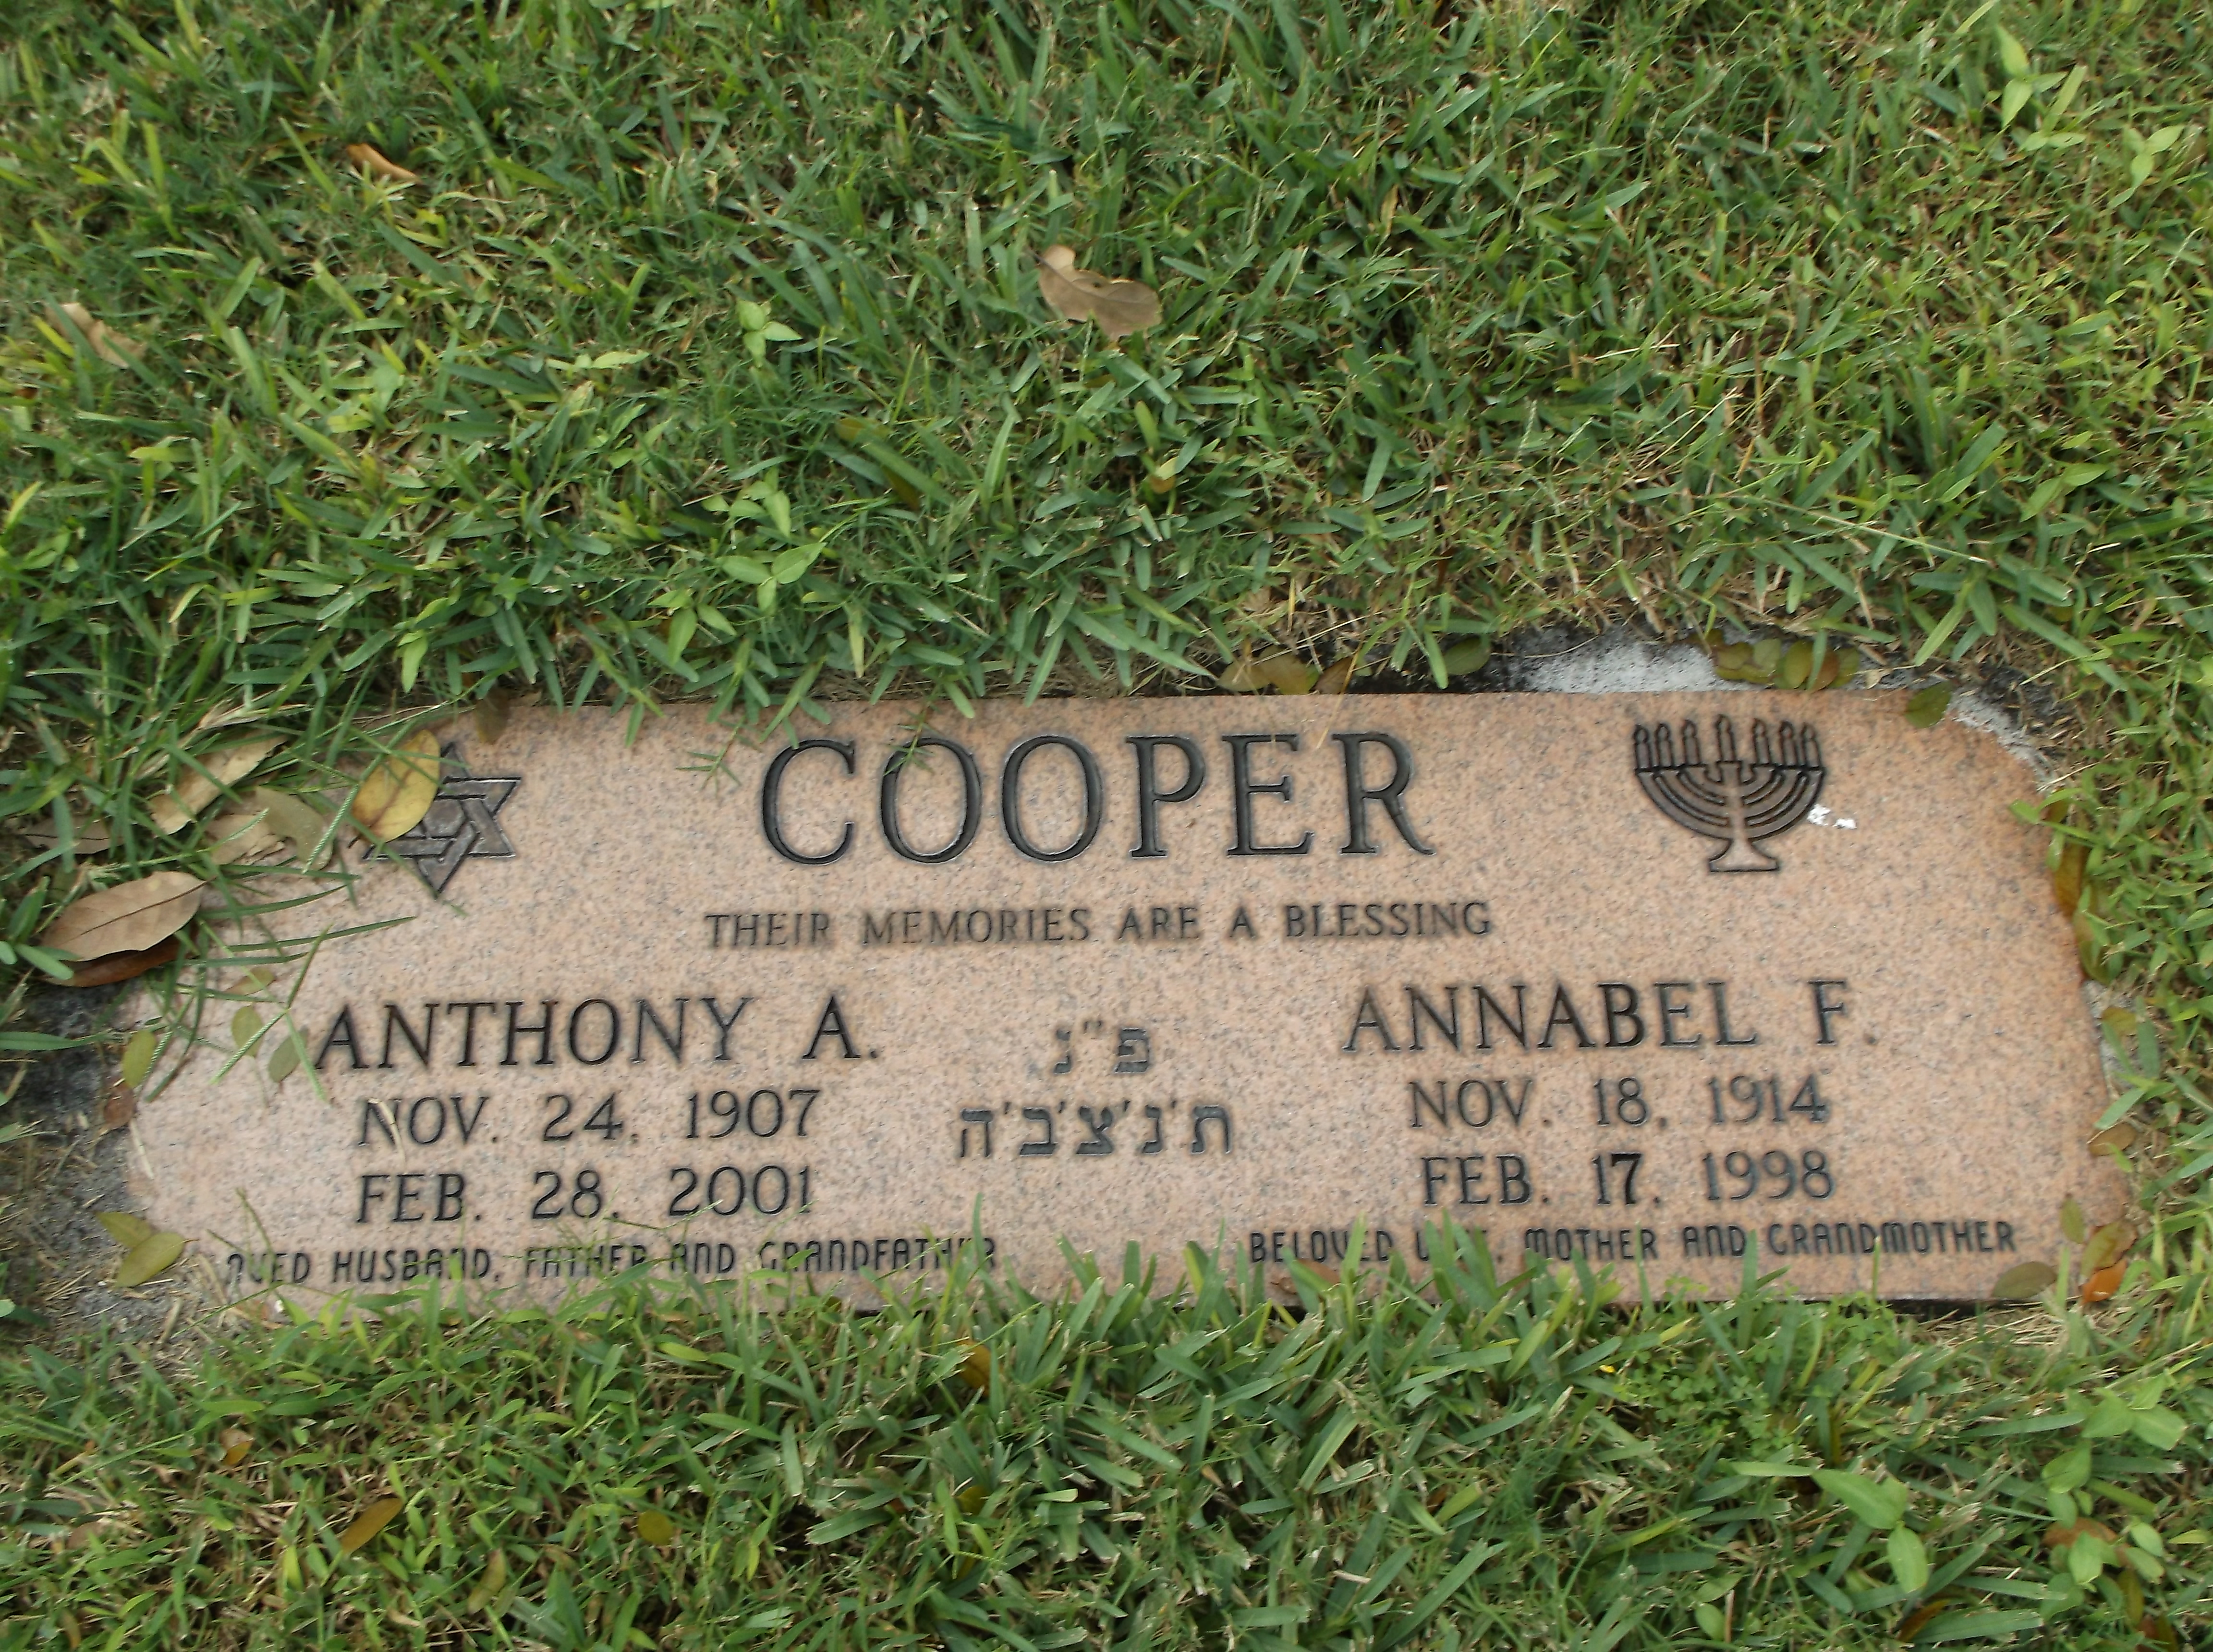 Anthony A Cooper